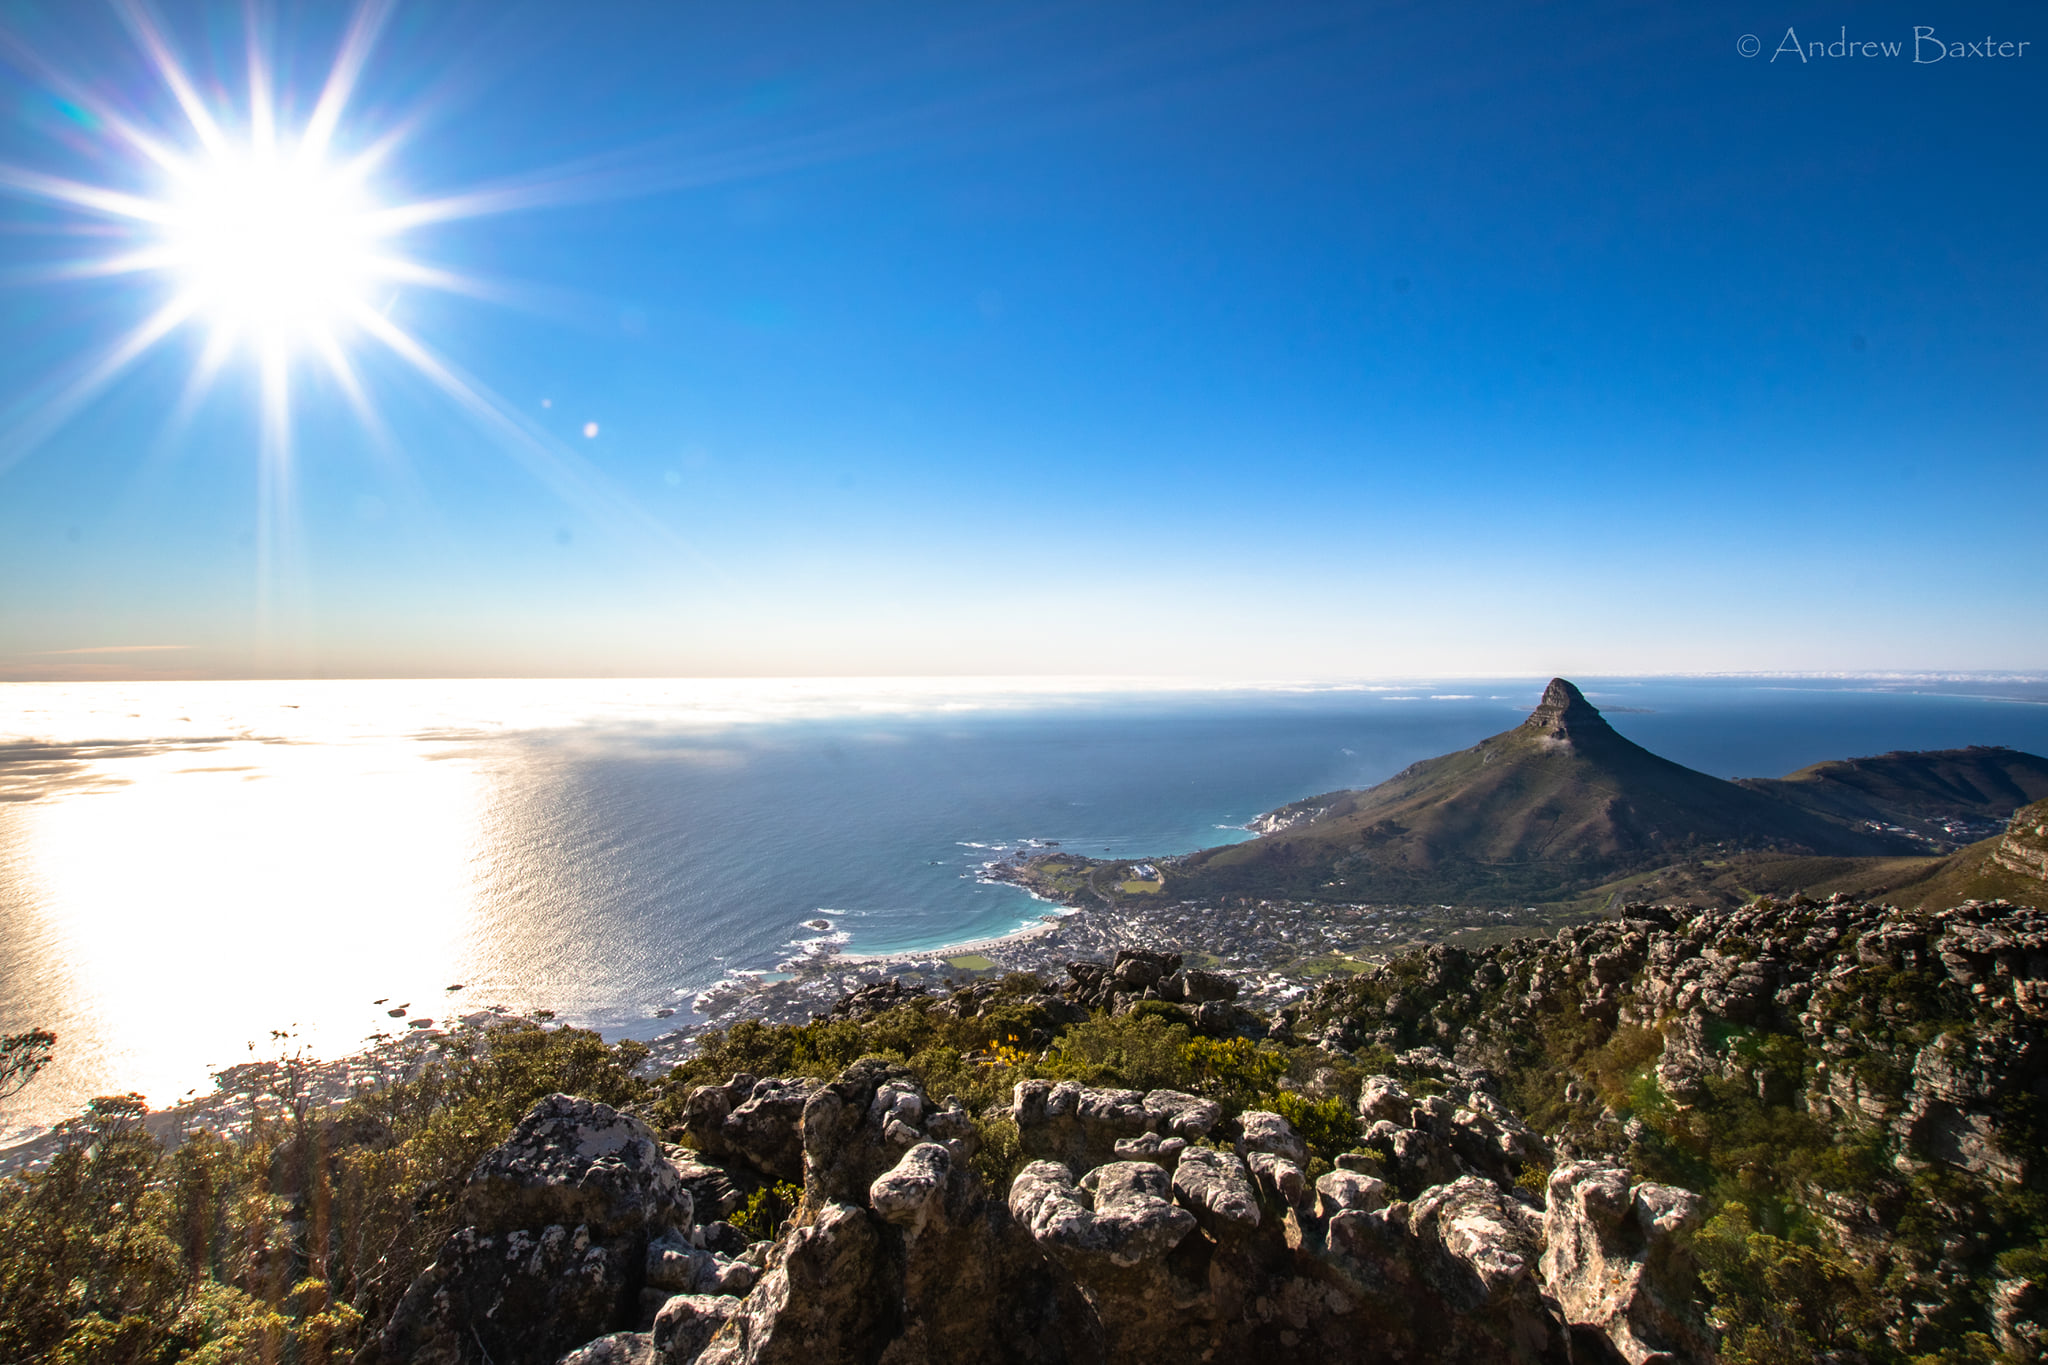 Lions Head & Camps Bay courtesy Andrew Baxter